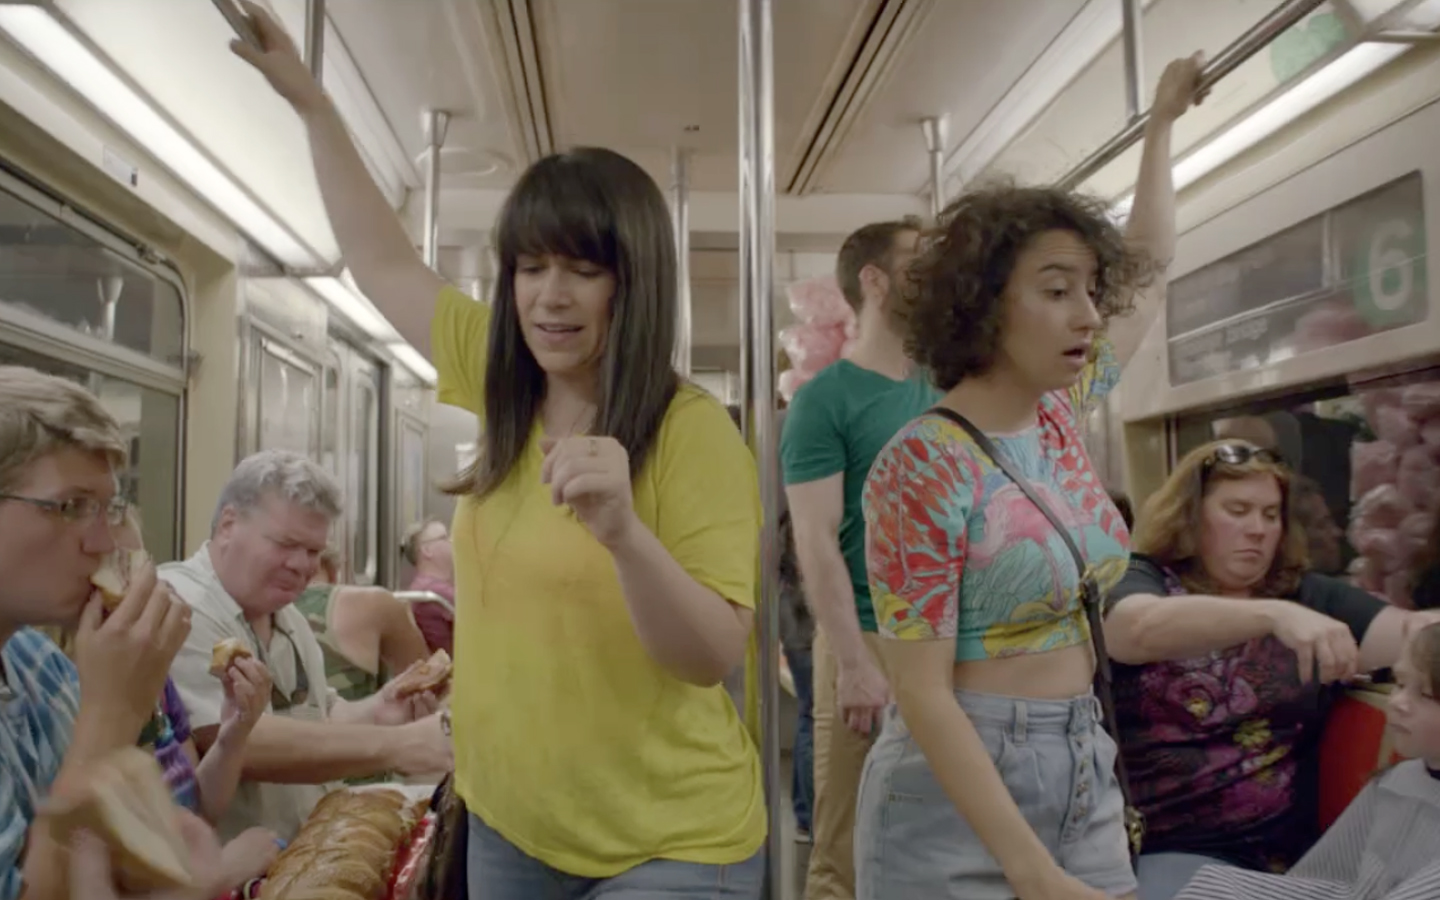 Comedy and the New York City subway